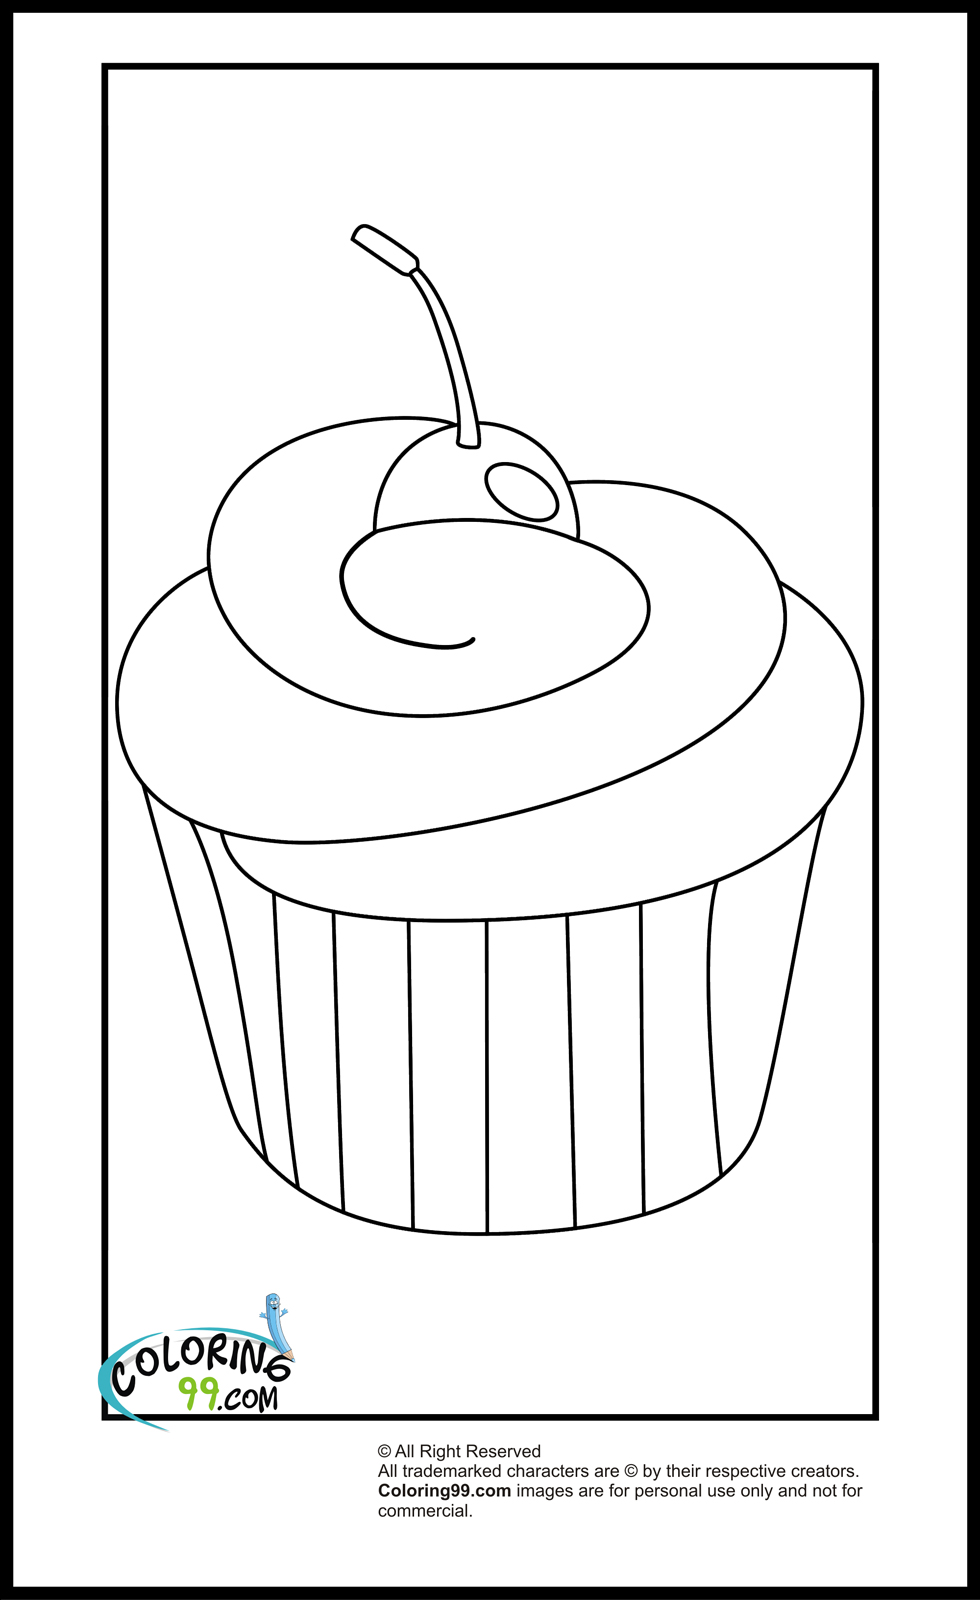 Download Cupcake Coloring Pages | Minister Coloring